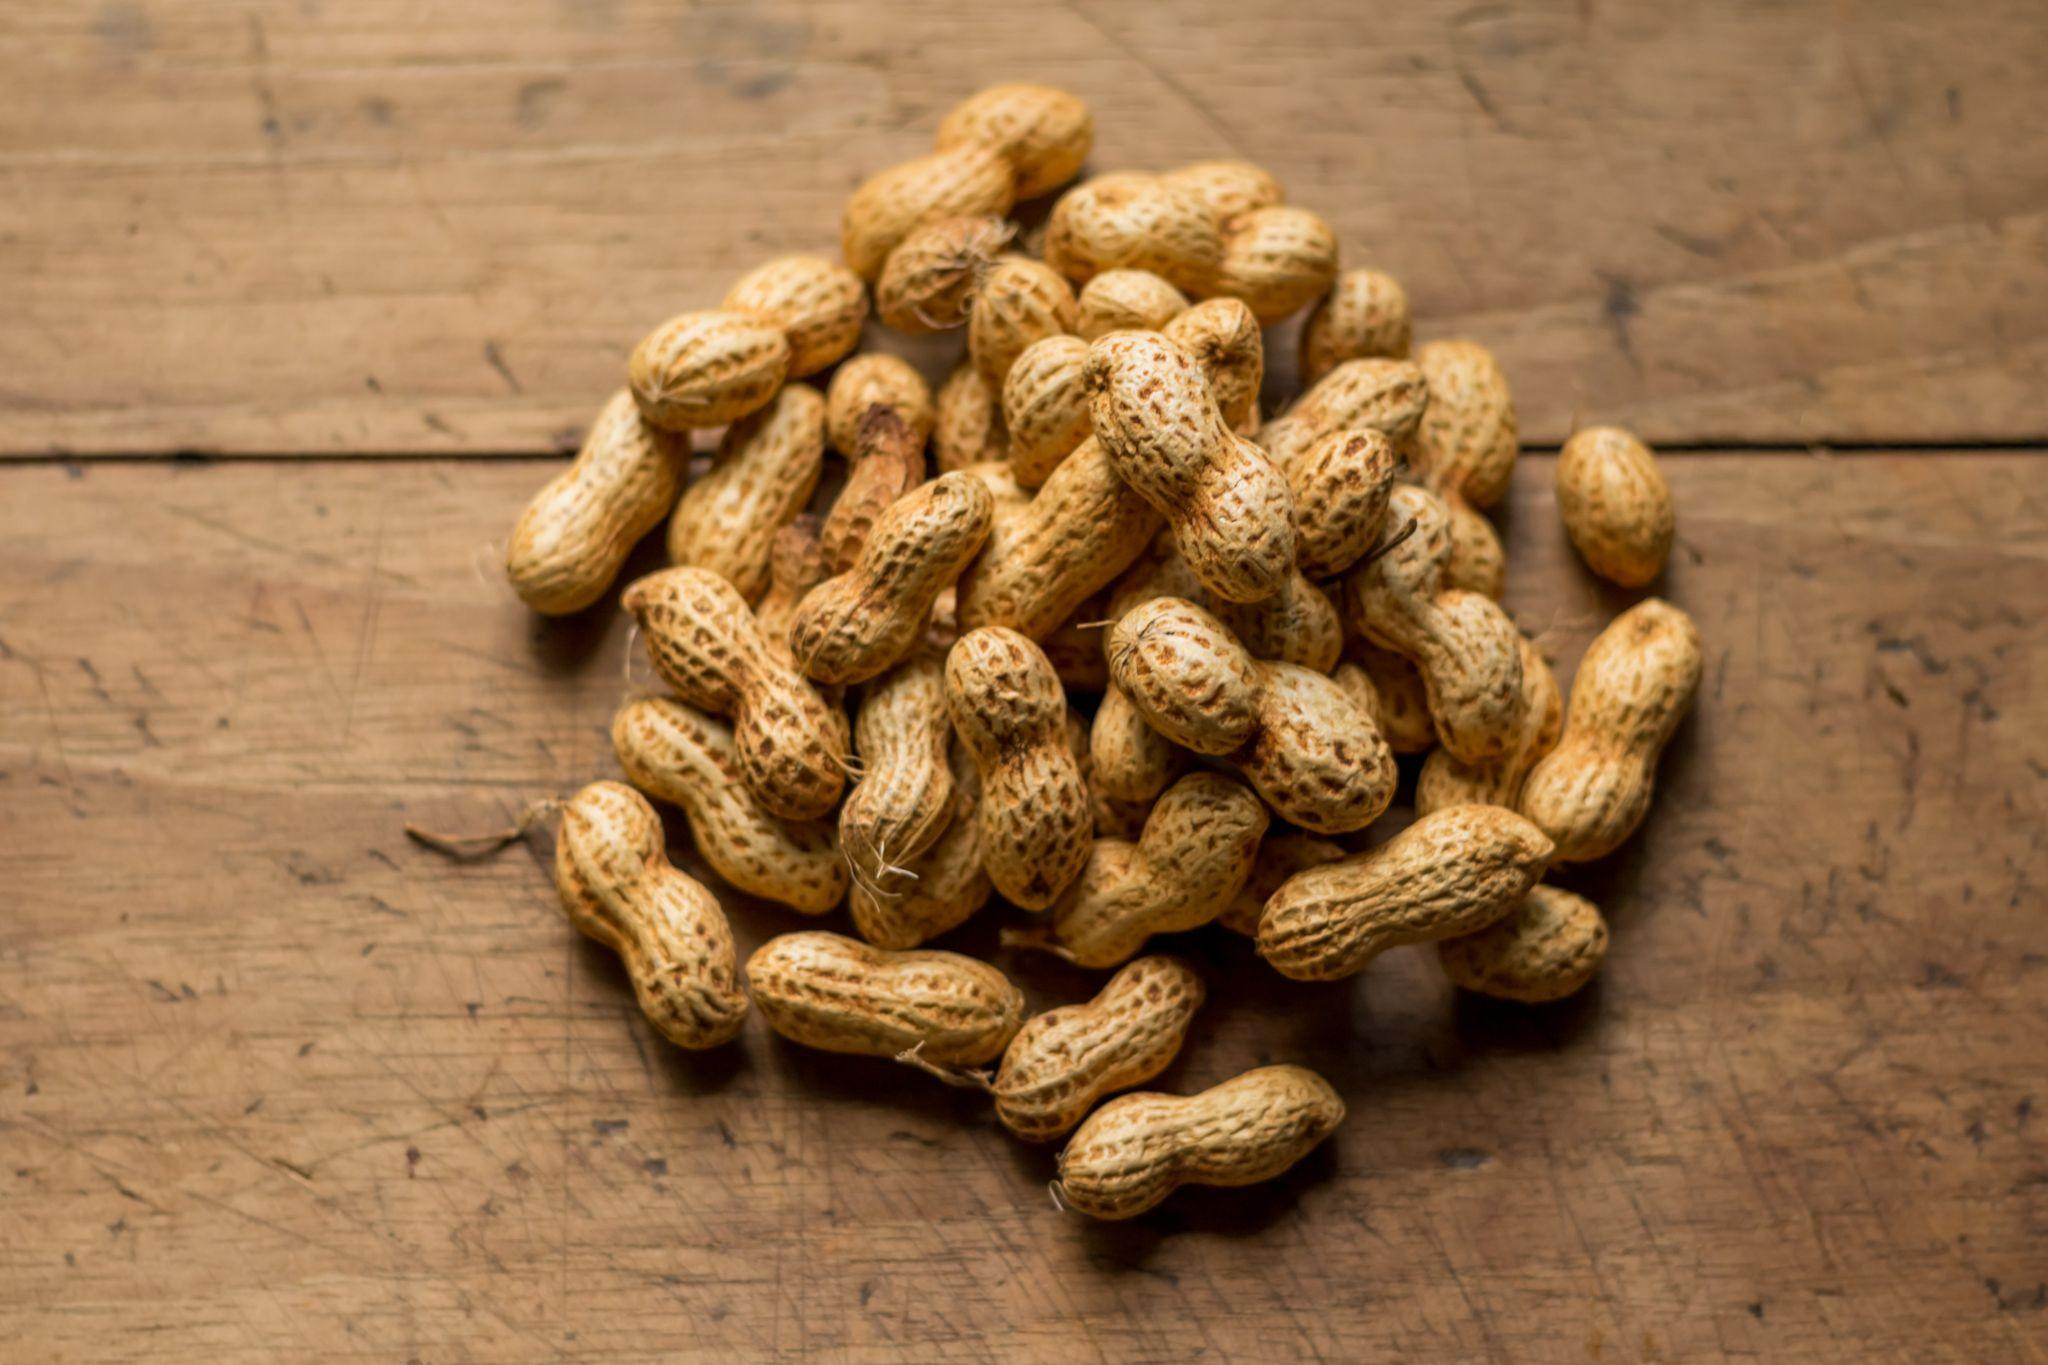 Allergy relief medicine can provide effective relief to peanut allergy